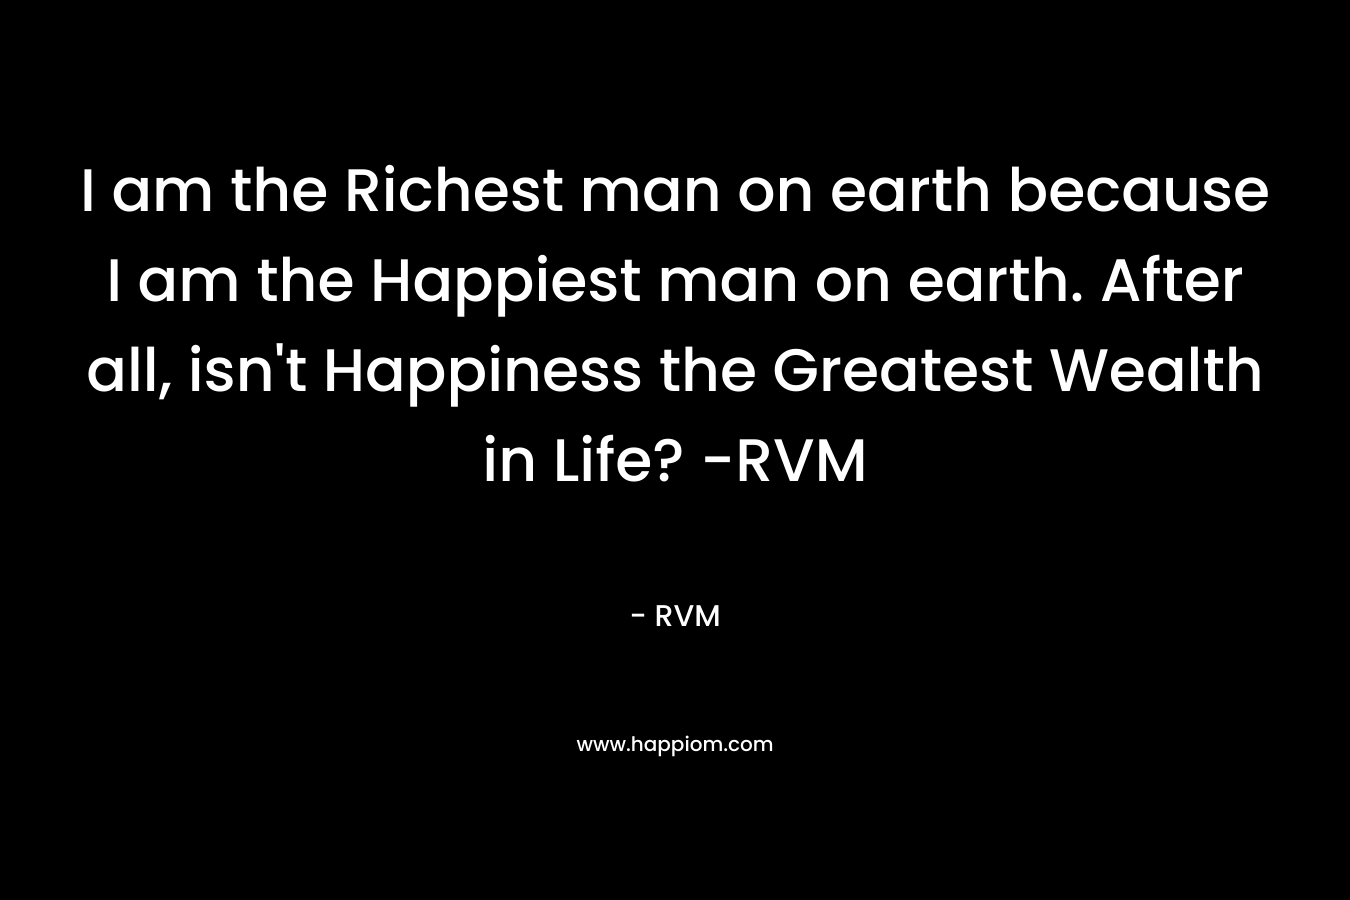 I am the Richest man on earth because I am the Happiest man on earth. After all, isn't Happiness the Greatest Wealth in Life? -RVM